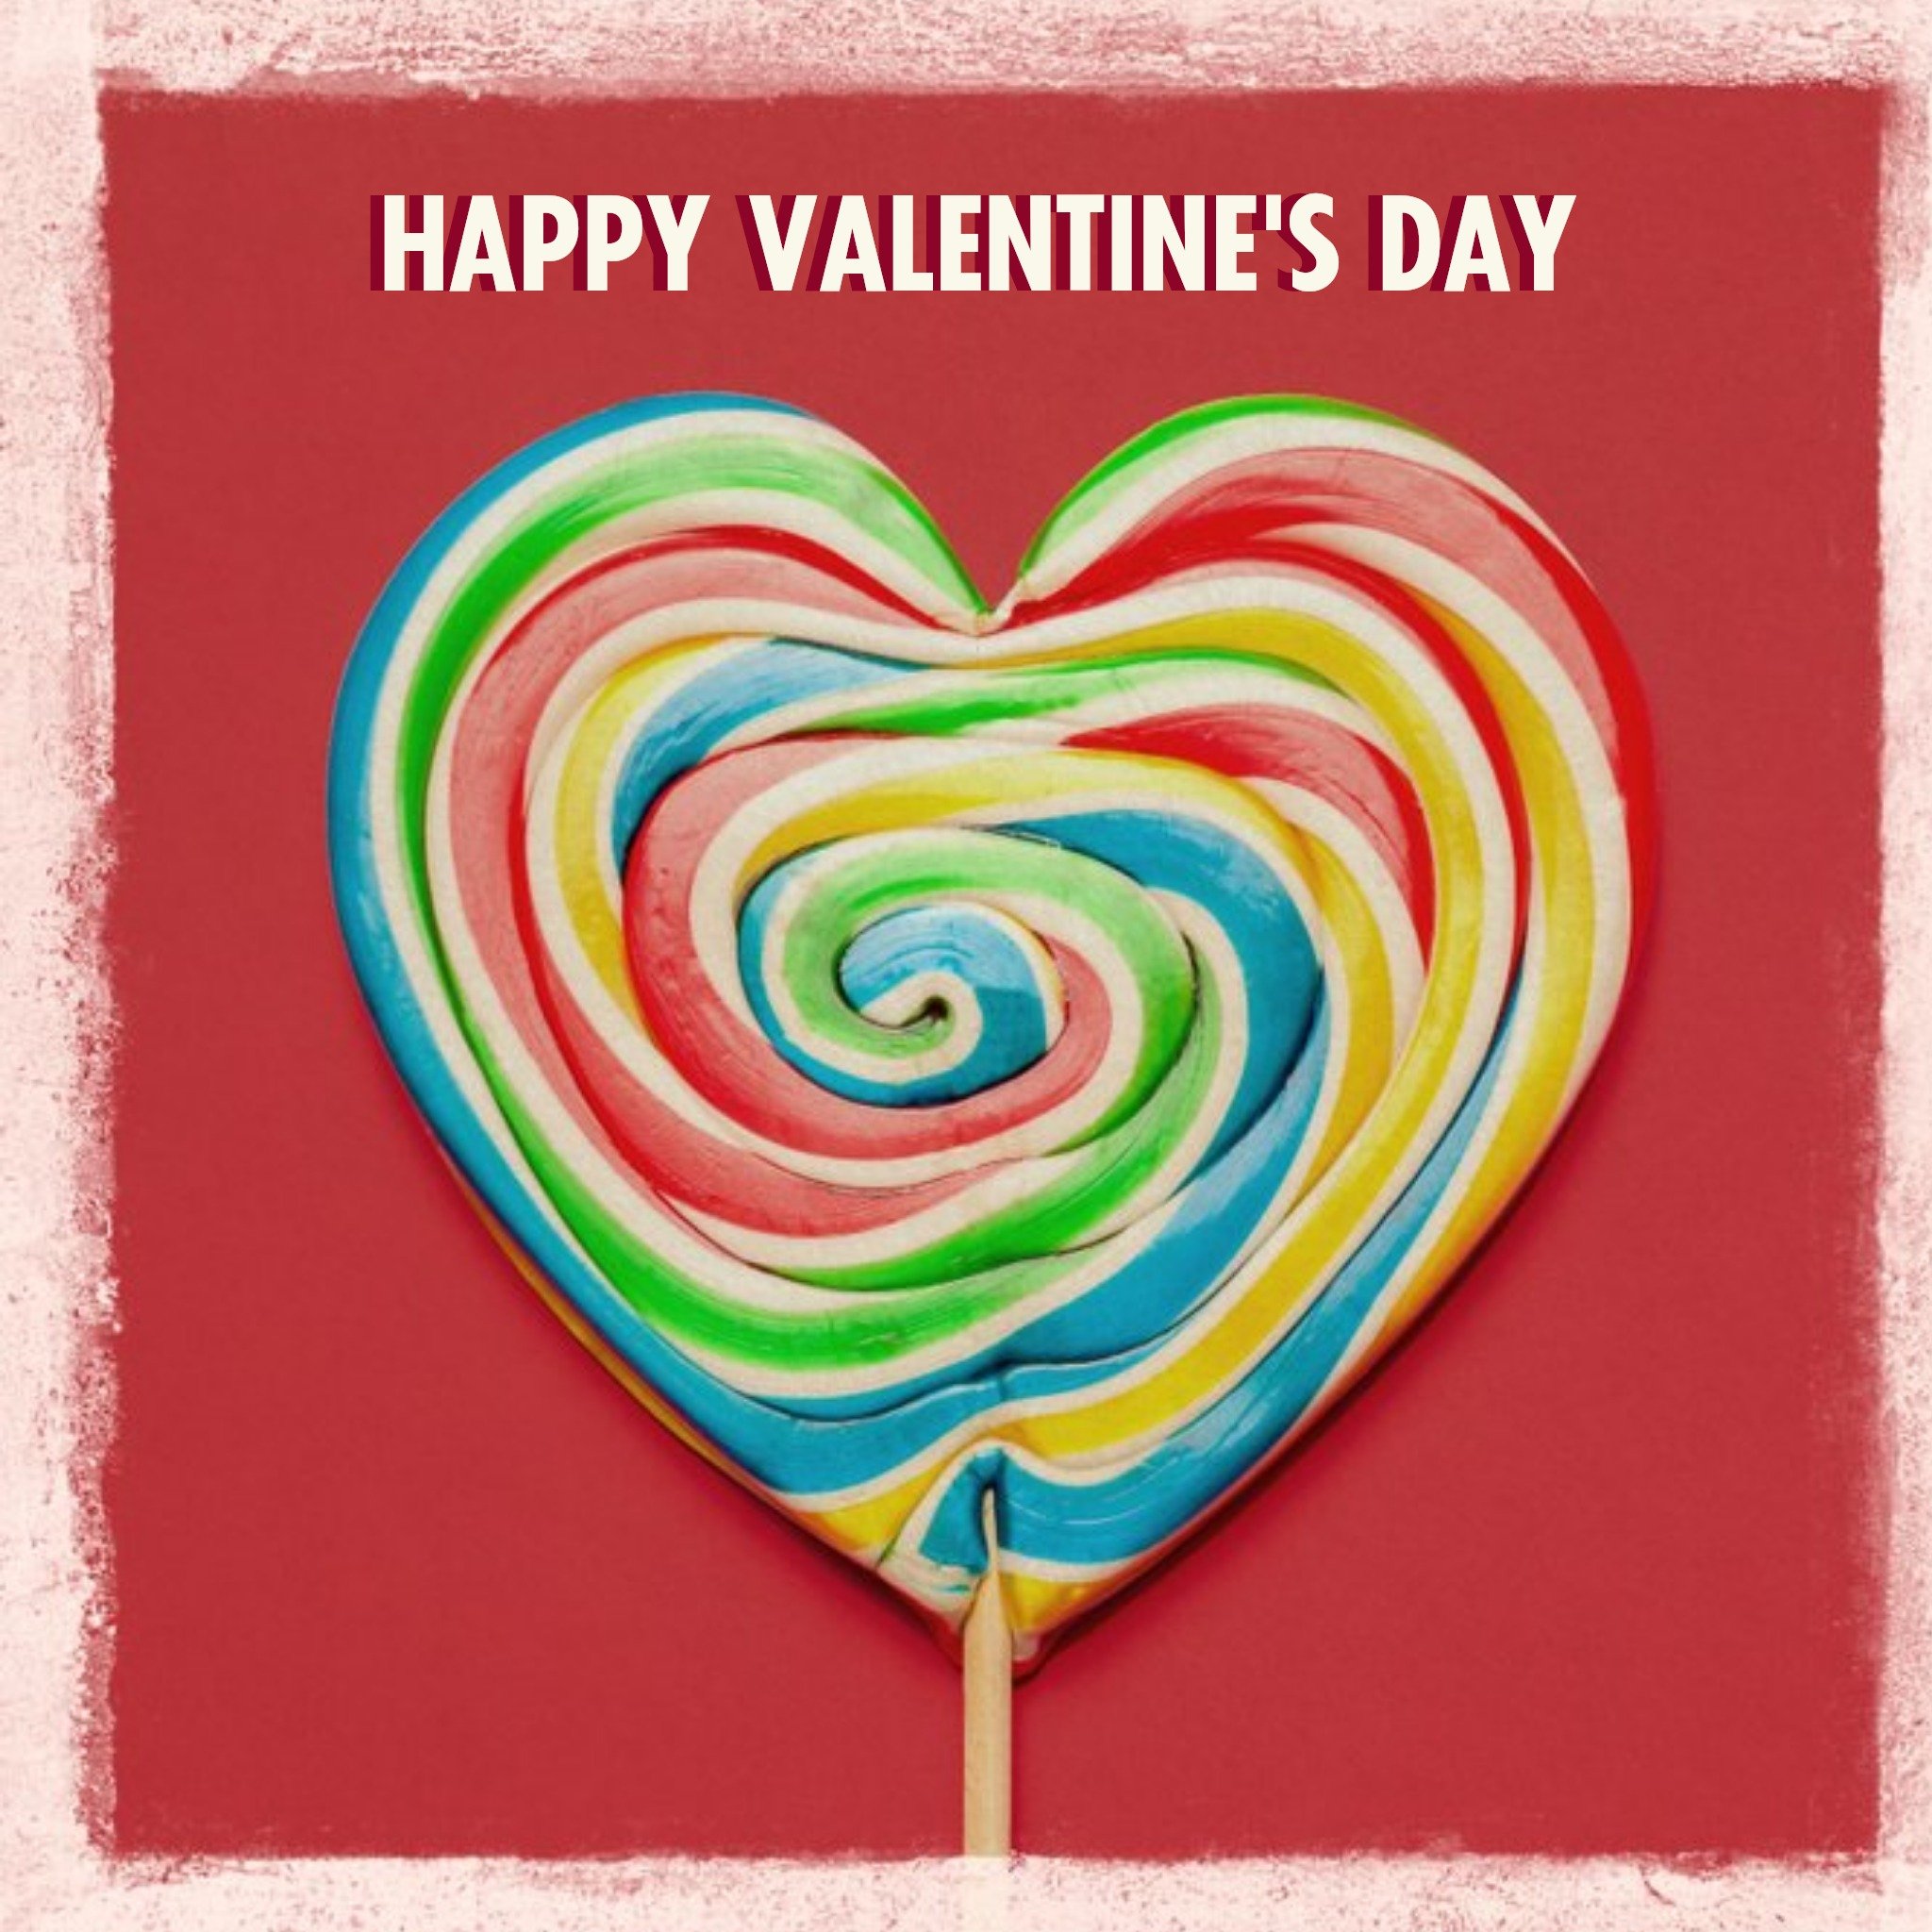 Moonpig Heart Shaped Lollipop Personalised Happy Valentine's Day Card, Large